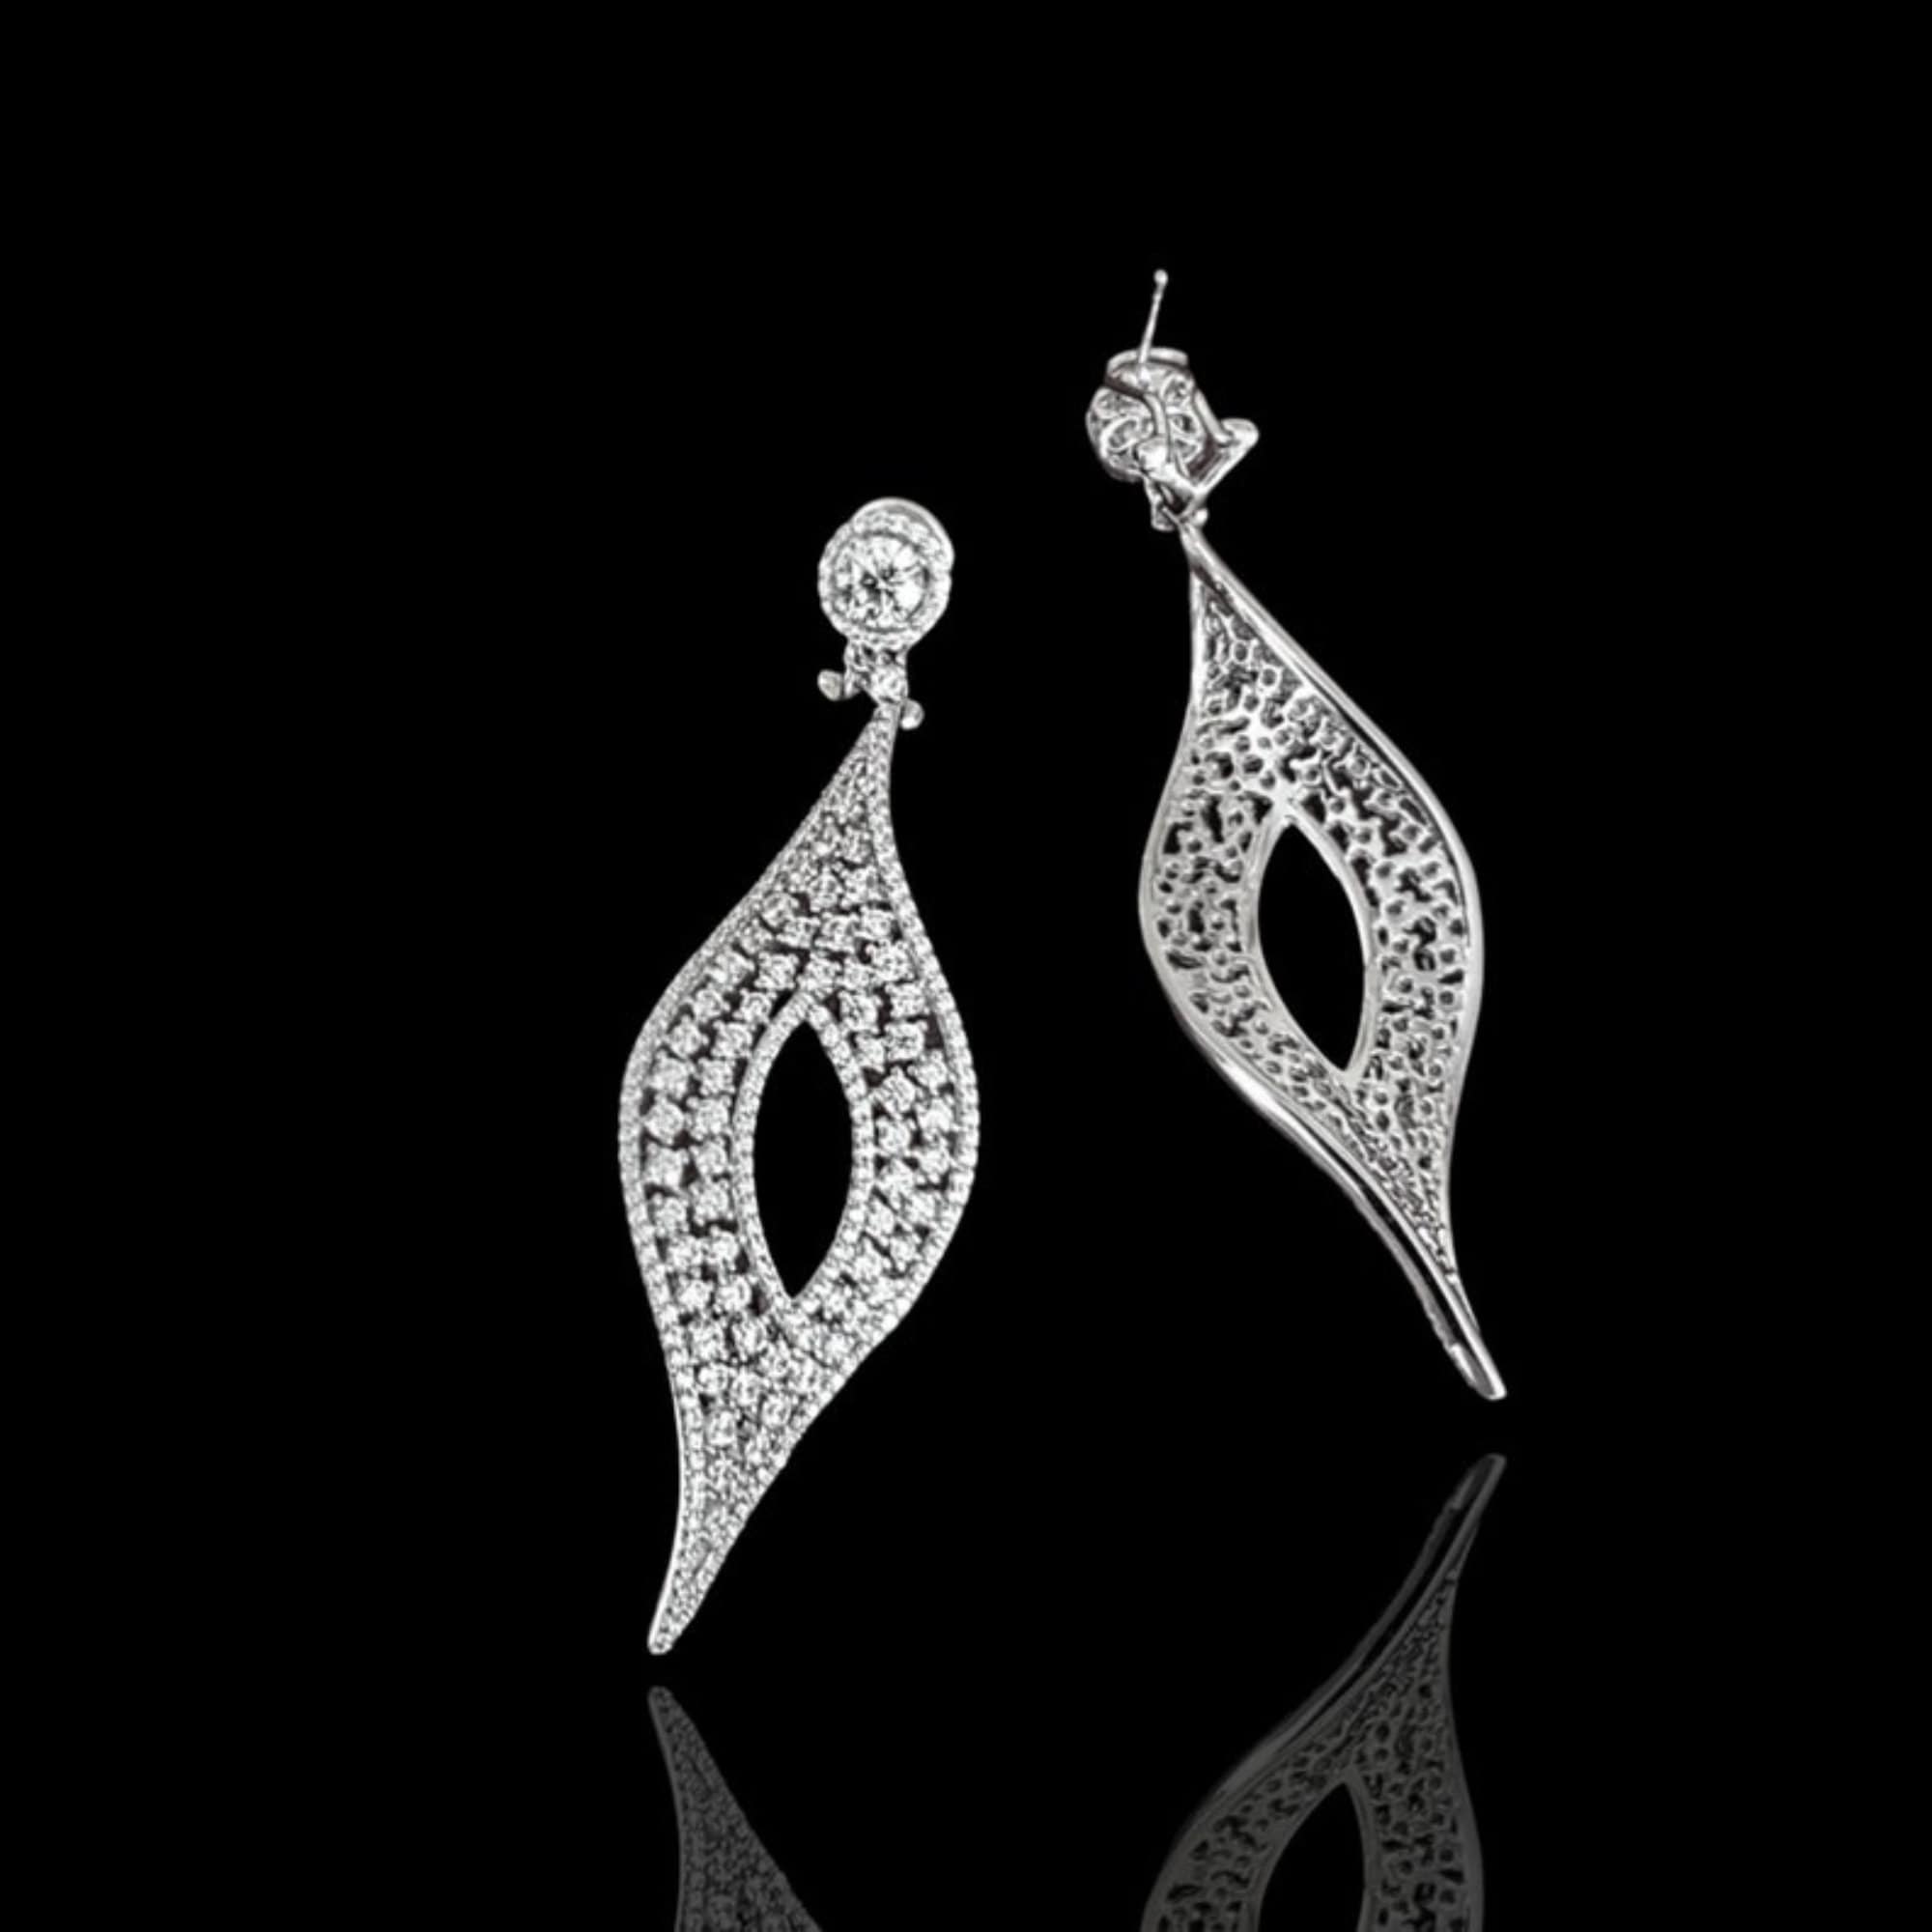 18K White Gold Vermeil Marquise Chandelier Drop Earrings Bridal Earrings, Wedding Earrings, Valentine's Day, Mother Day, Gift for her